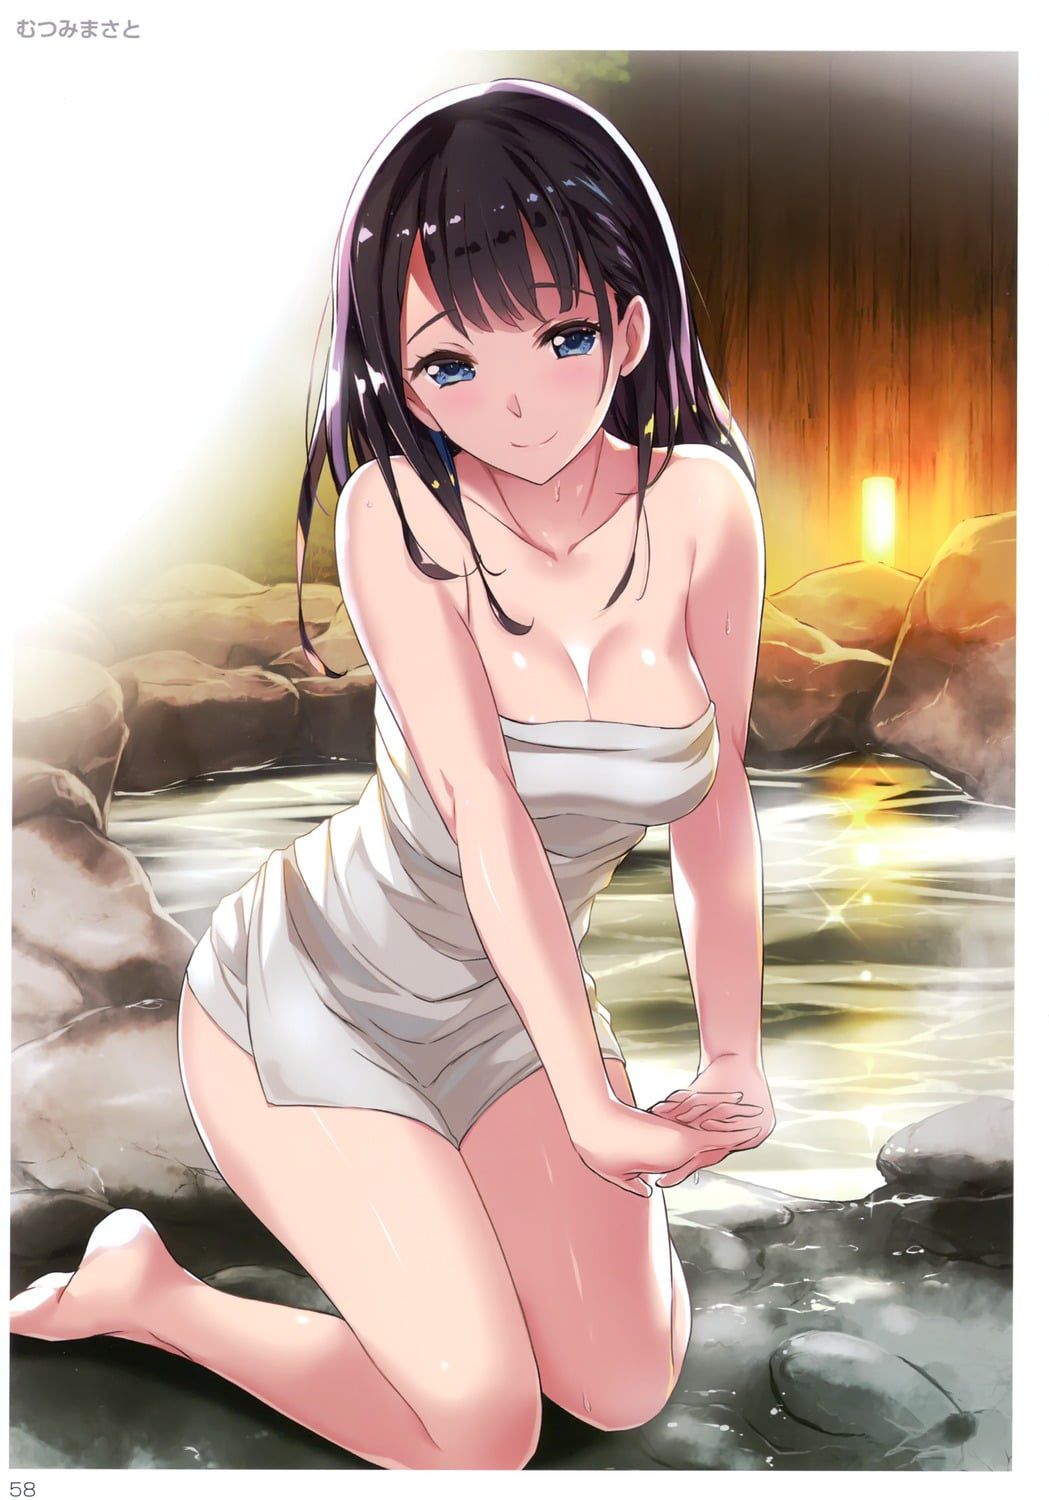 Let's gaze at the bath scene of a defenseless girl during relaxation time! 26